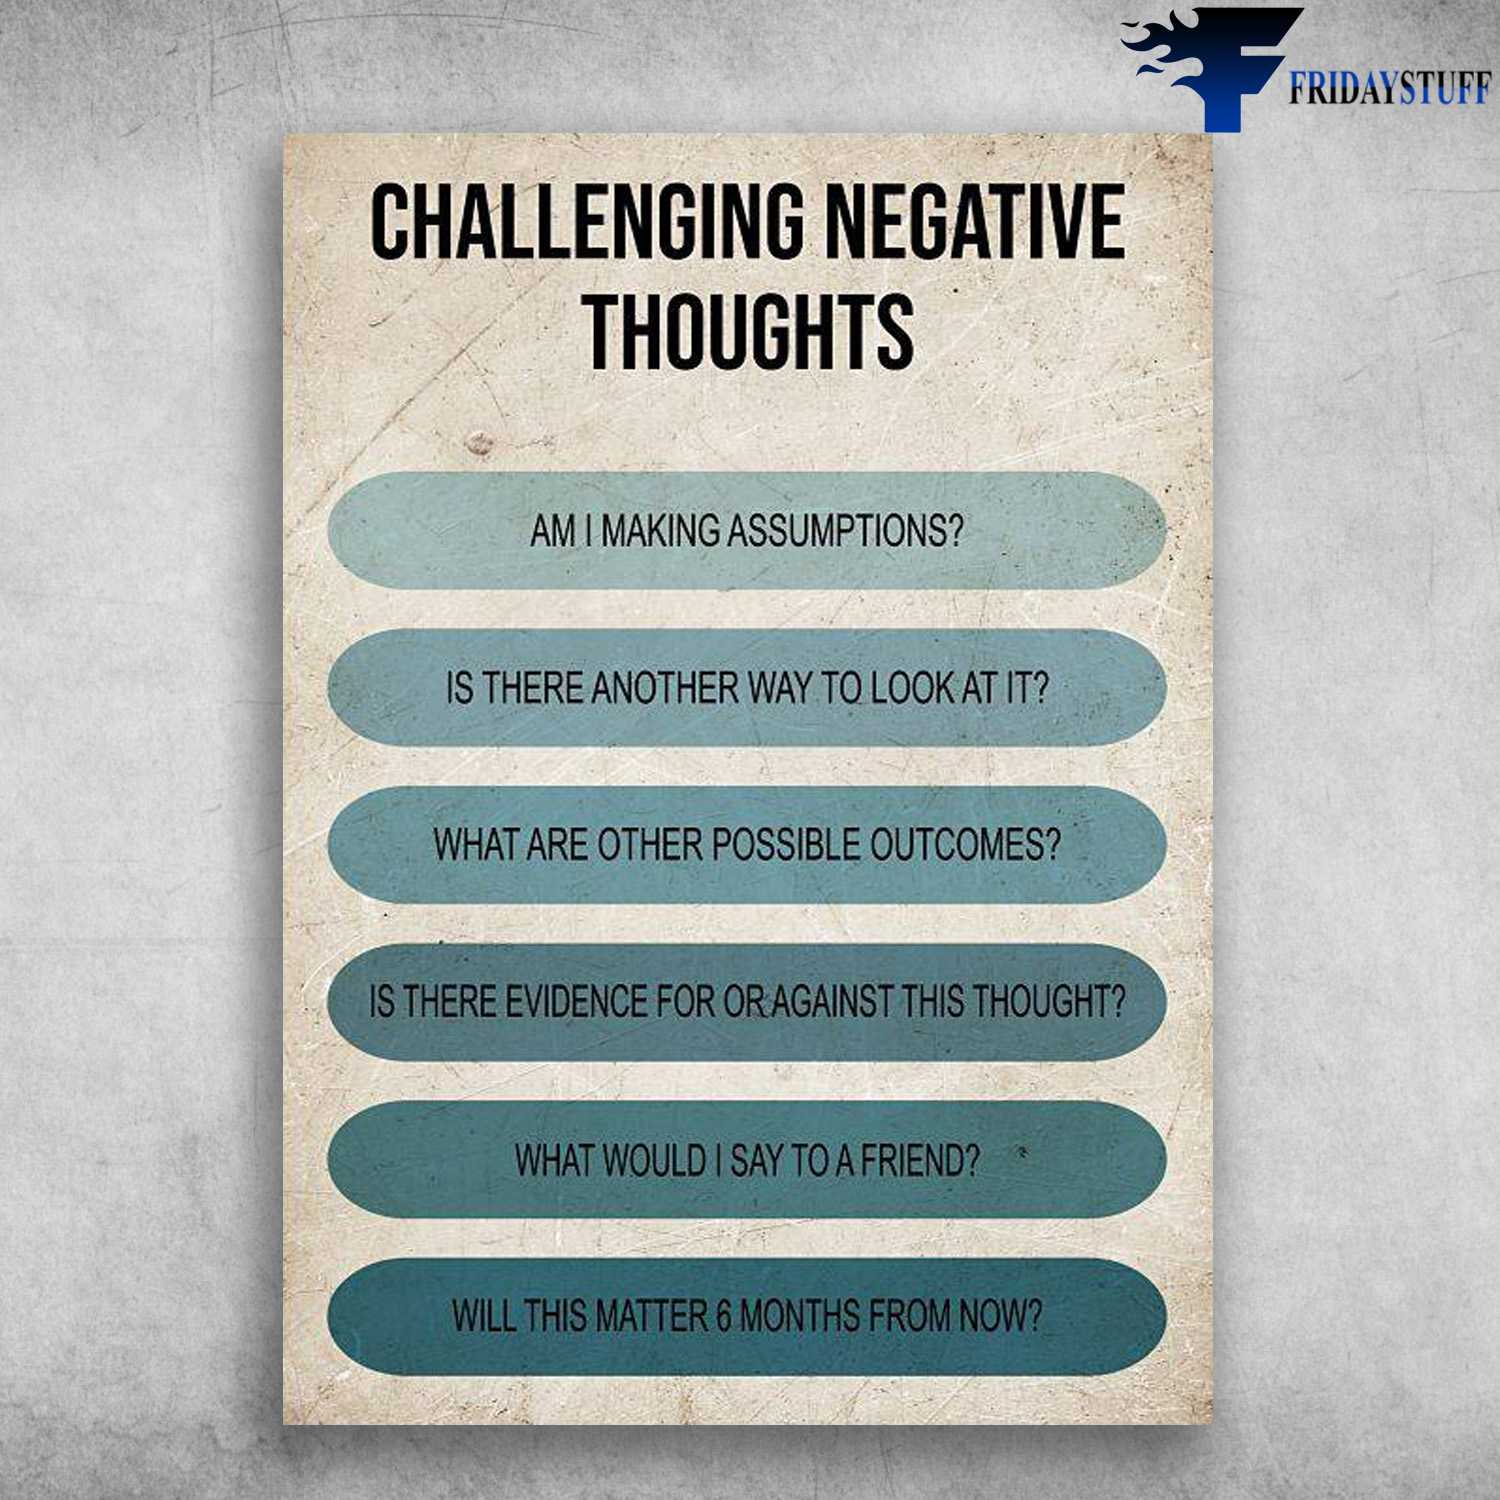 Challenging Negative Thoughts - Am I Making Assumptions, Is There Another Way To Look At It, What Are Other Possible Outcomes, Is There Evidence For Or Against This Through